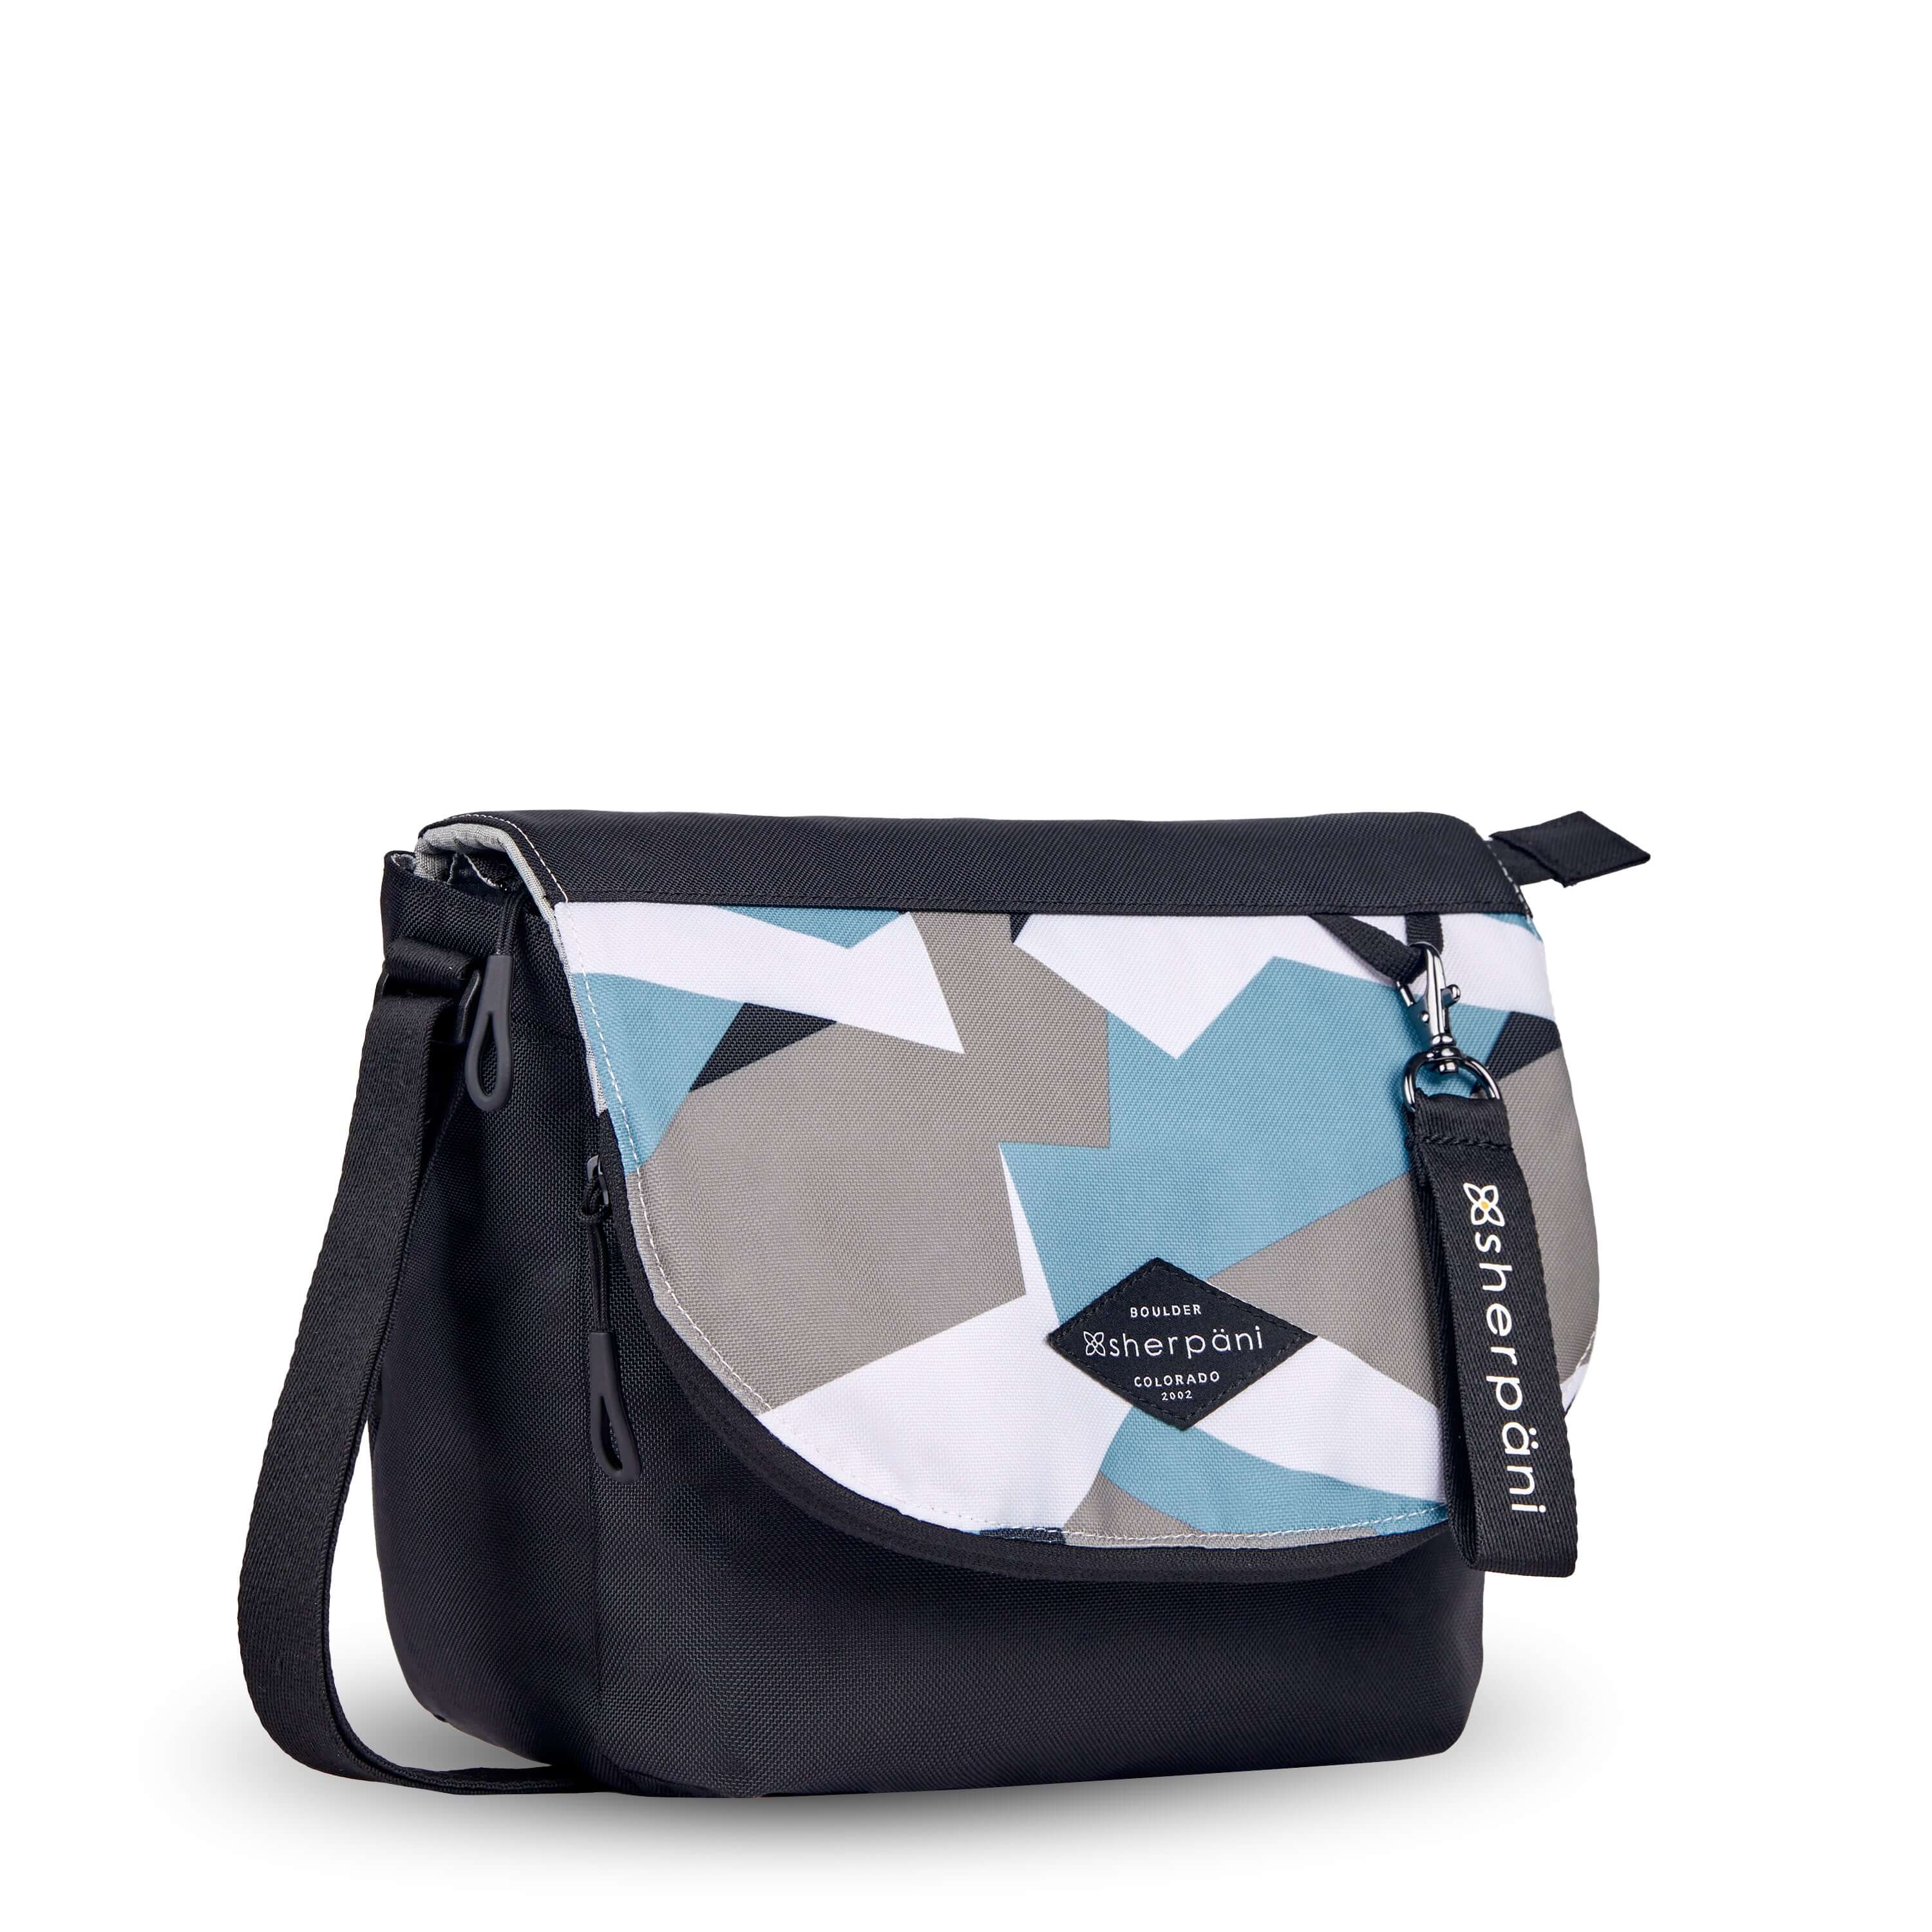 Angled front view of Sherpani crossbody, the Milli in Summer Camo. The messenger style bag is two toned: the layover flap is a camouflage pattern of light blue, gray and white, the remainder of the bag is black. Easy pull zippers are accented in black. The bag has an adjustable crossbody strap. A branded Sherpani keychain is clipped to a fabric loop in the upper right corner. 